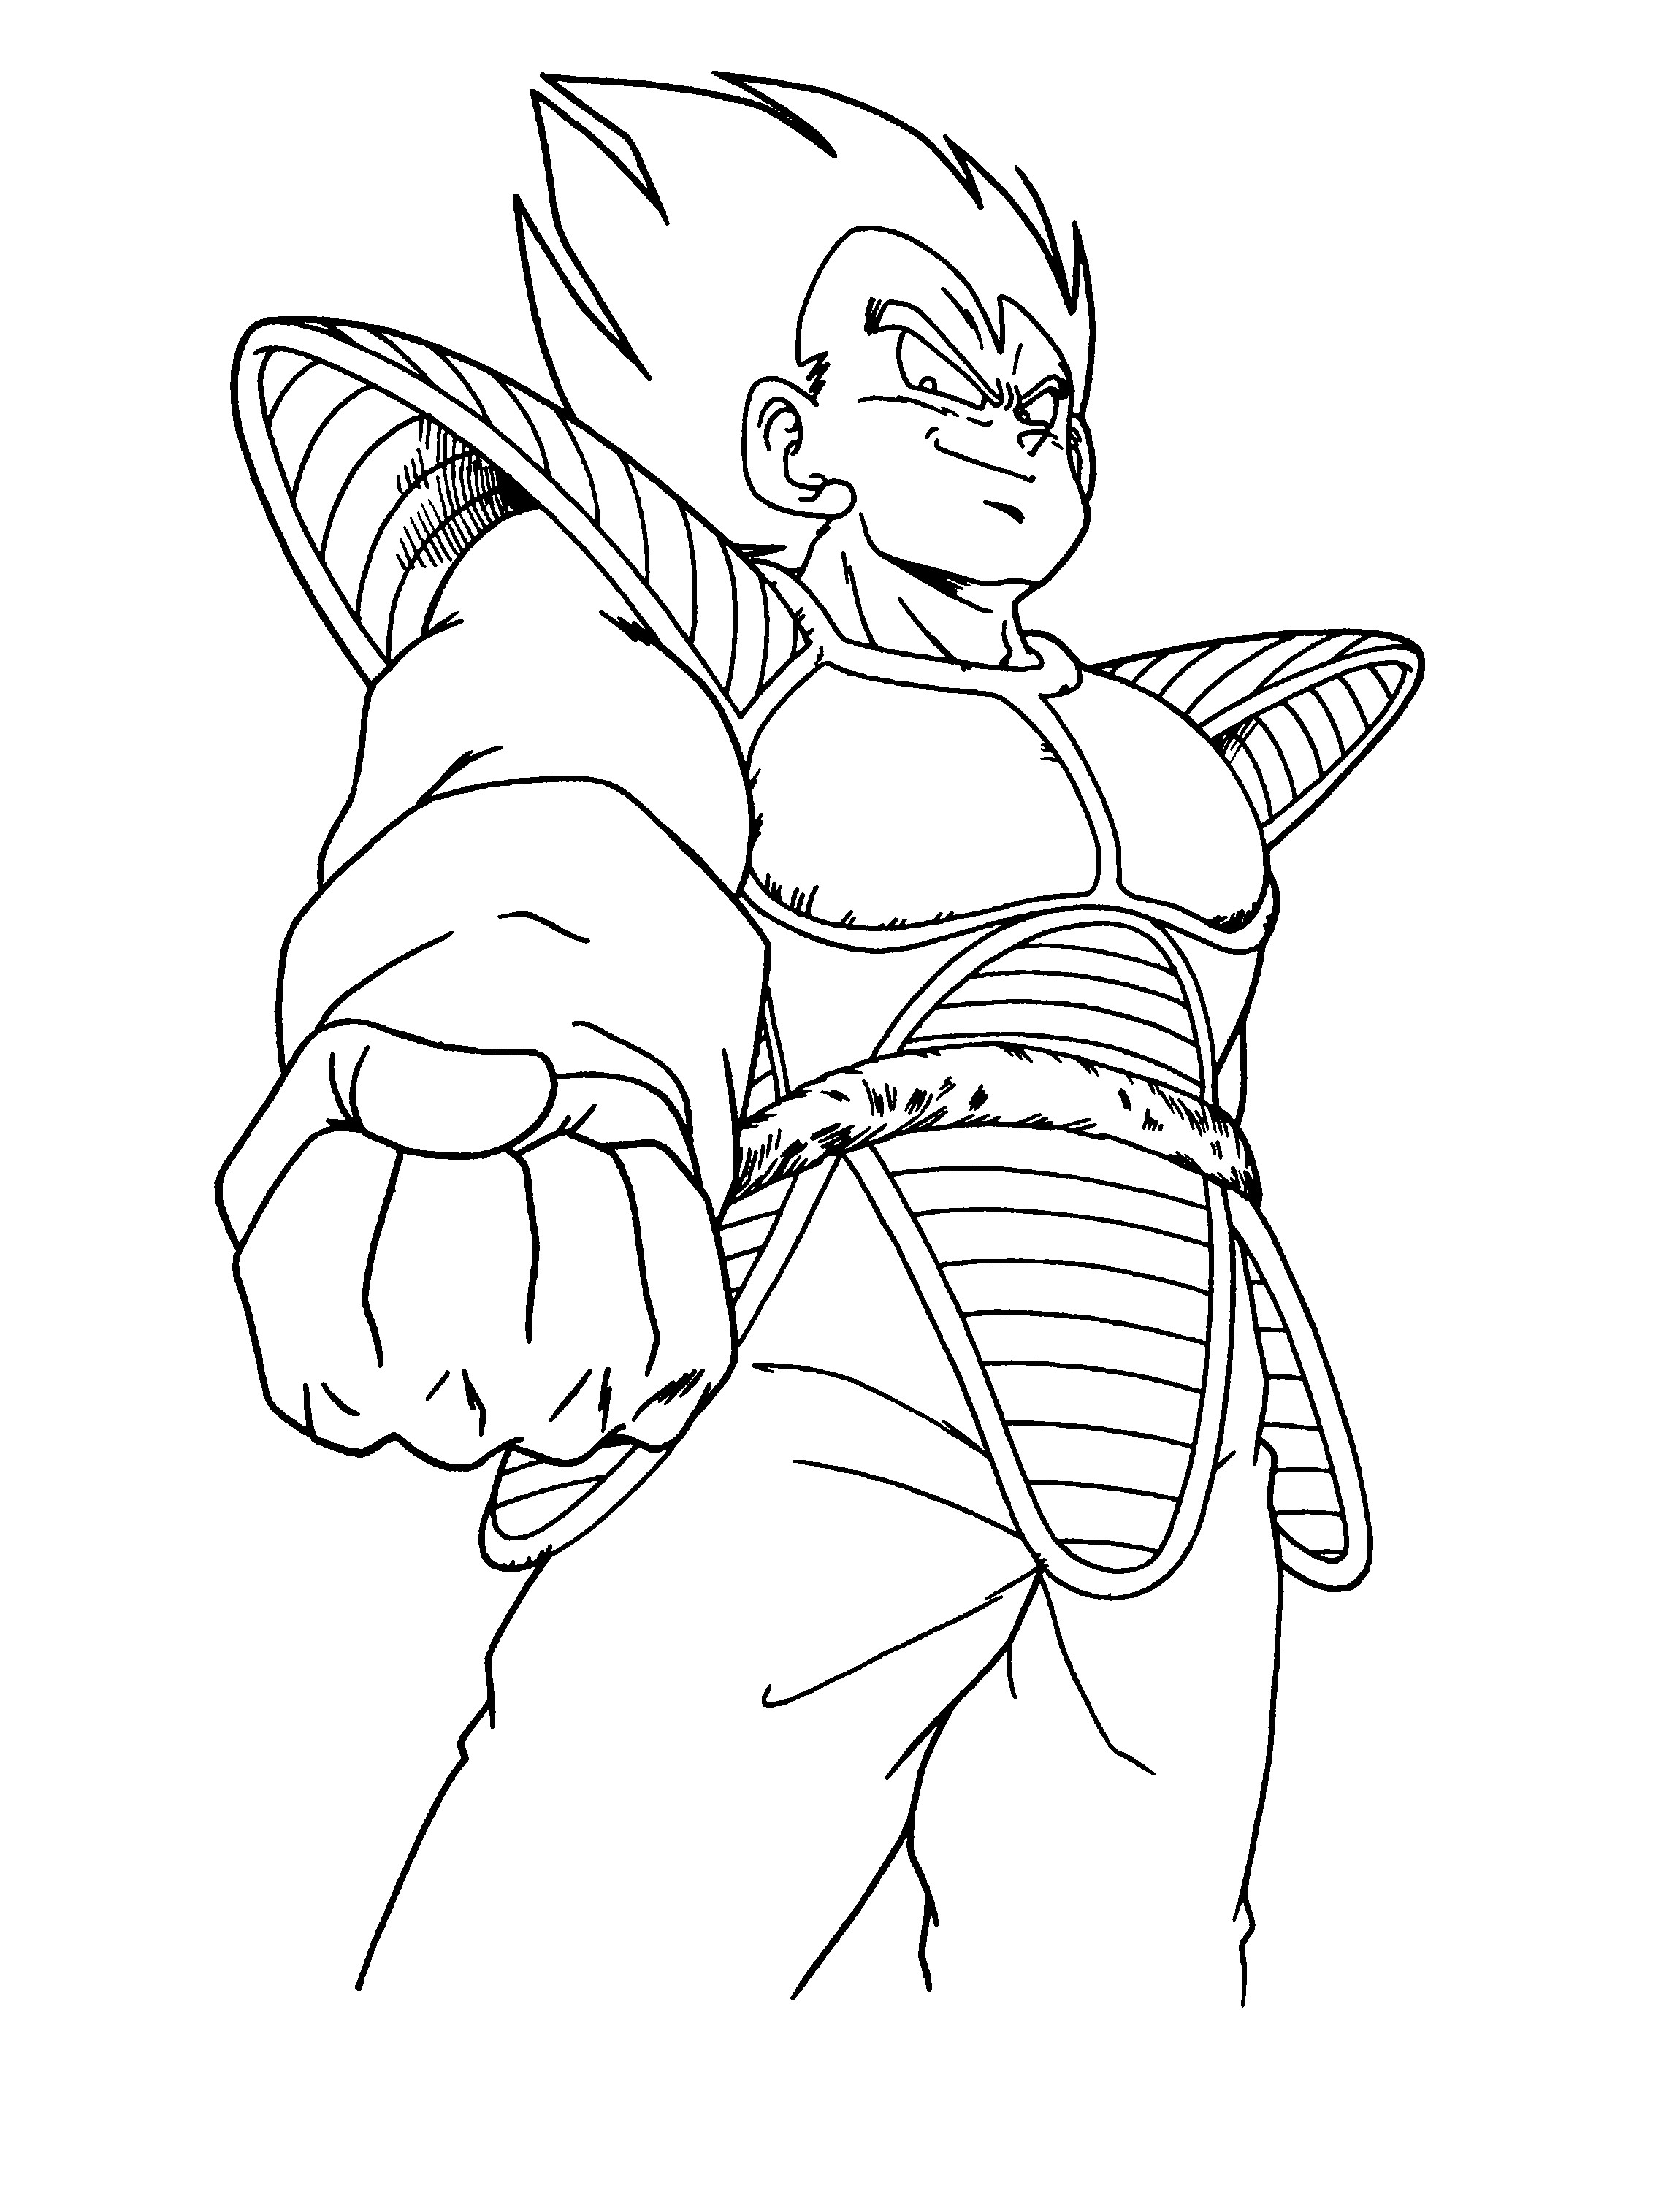 Free Dragon Ball Z Coloring Pages For Kids
 Free Printable Dragon Ball Z Coloring Pages For Kids